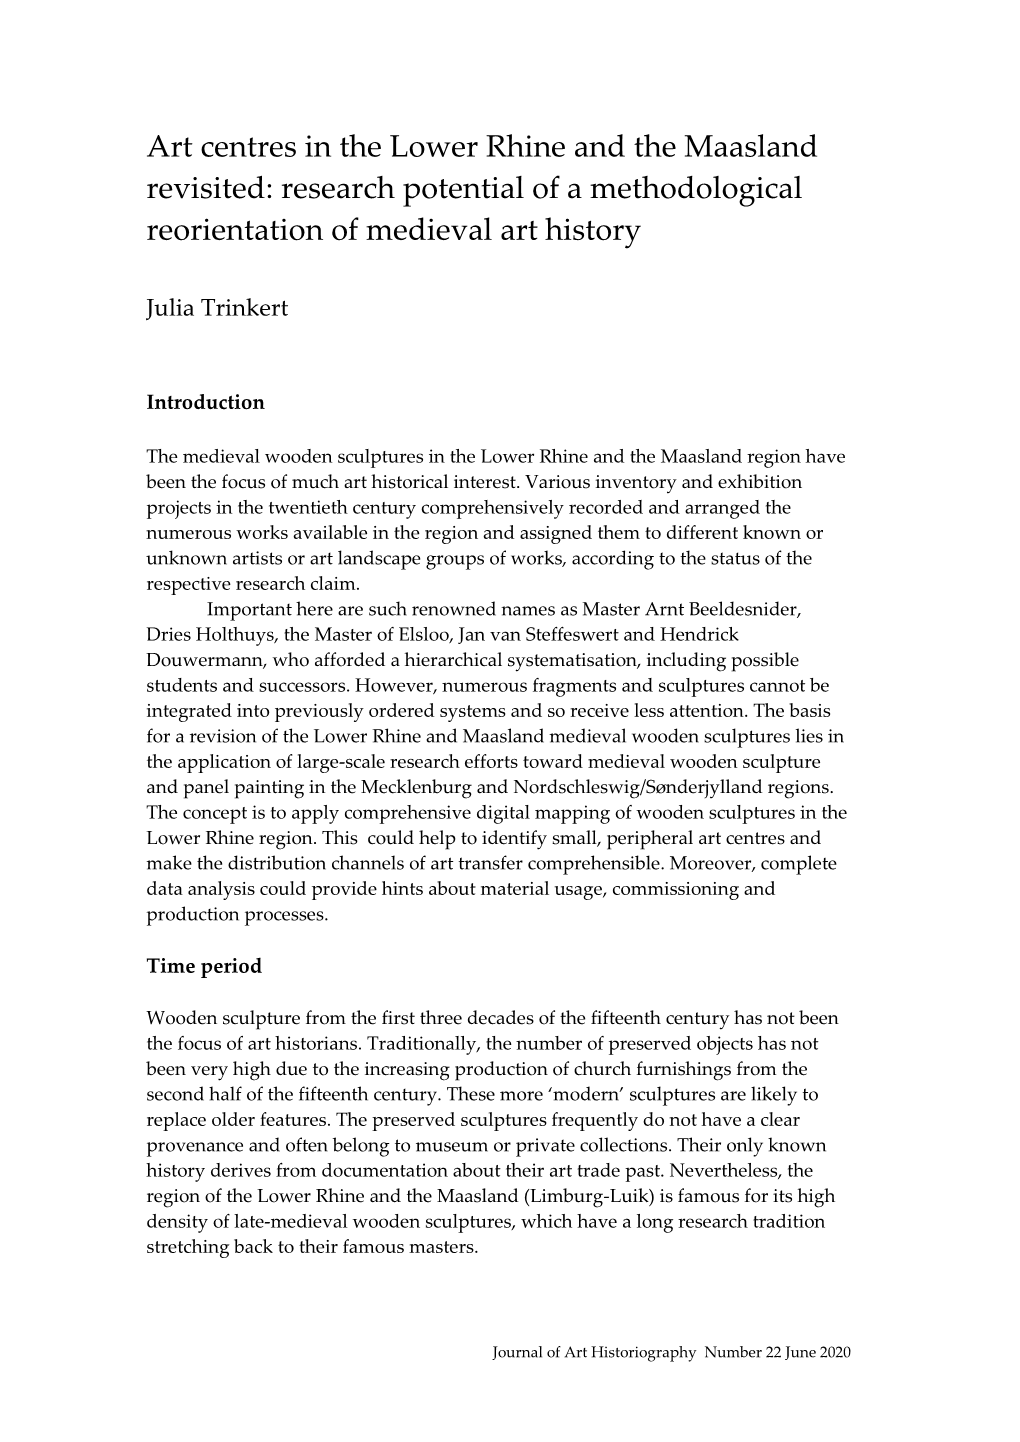 Art Centres in the Lower Rhine and the Maasland Revisited: Research Potential of a Methodological Reorientation of Medieval Art History